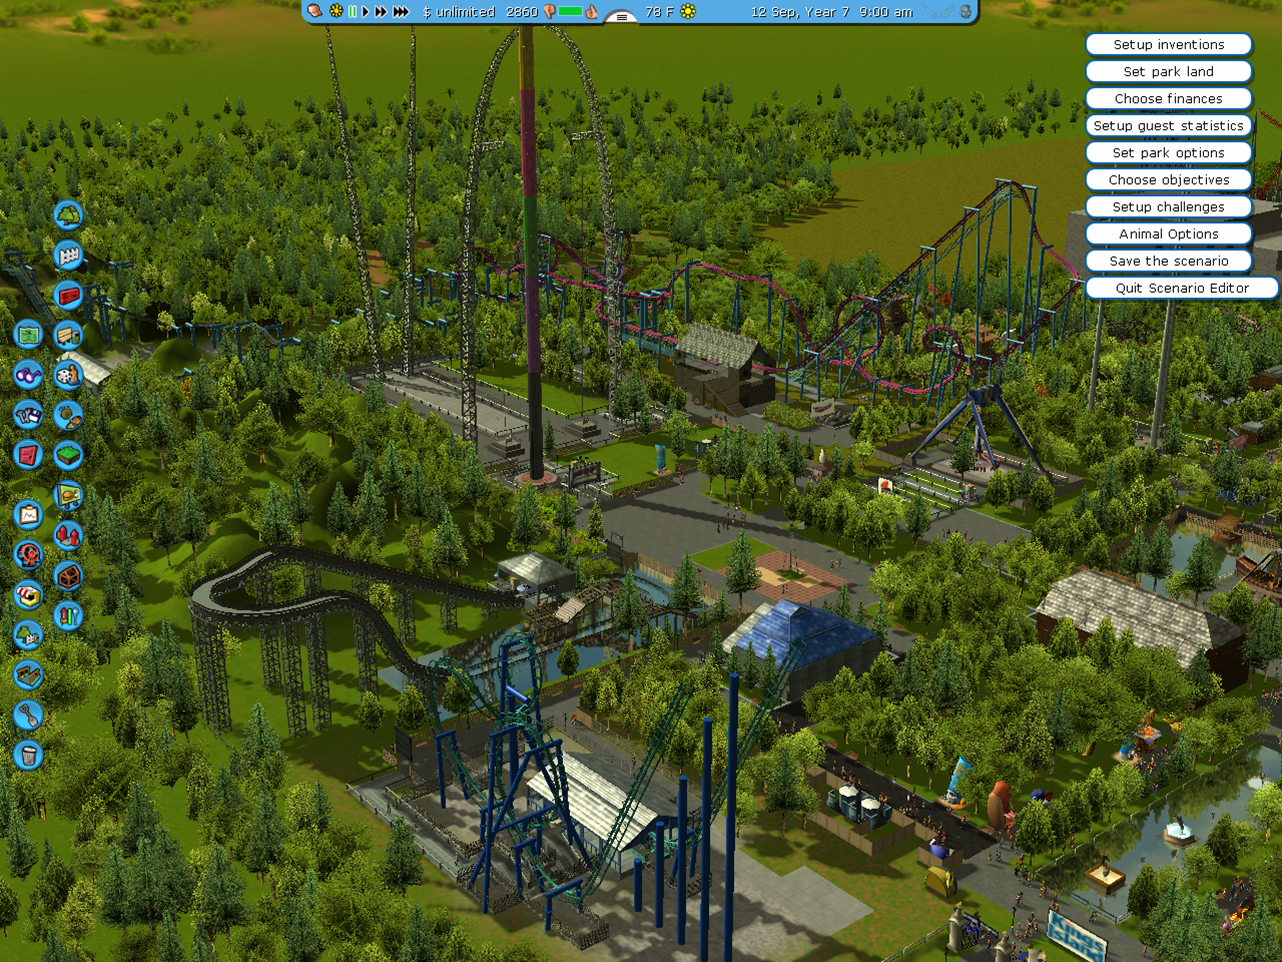 Roller coaster tycoon 3 gold download torrent